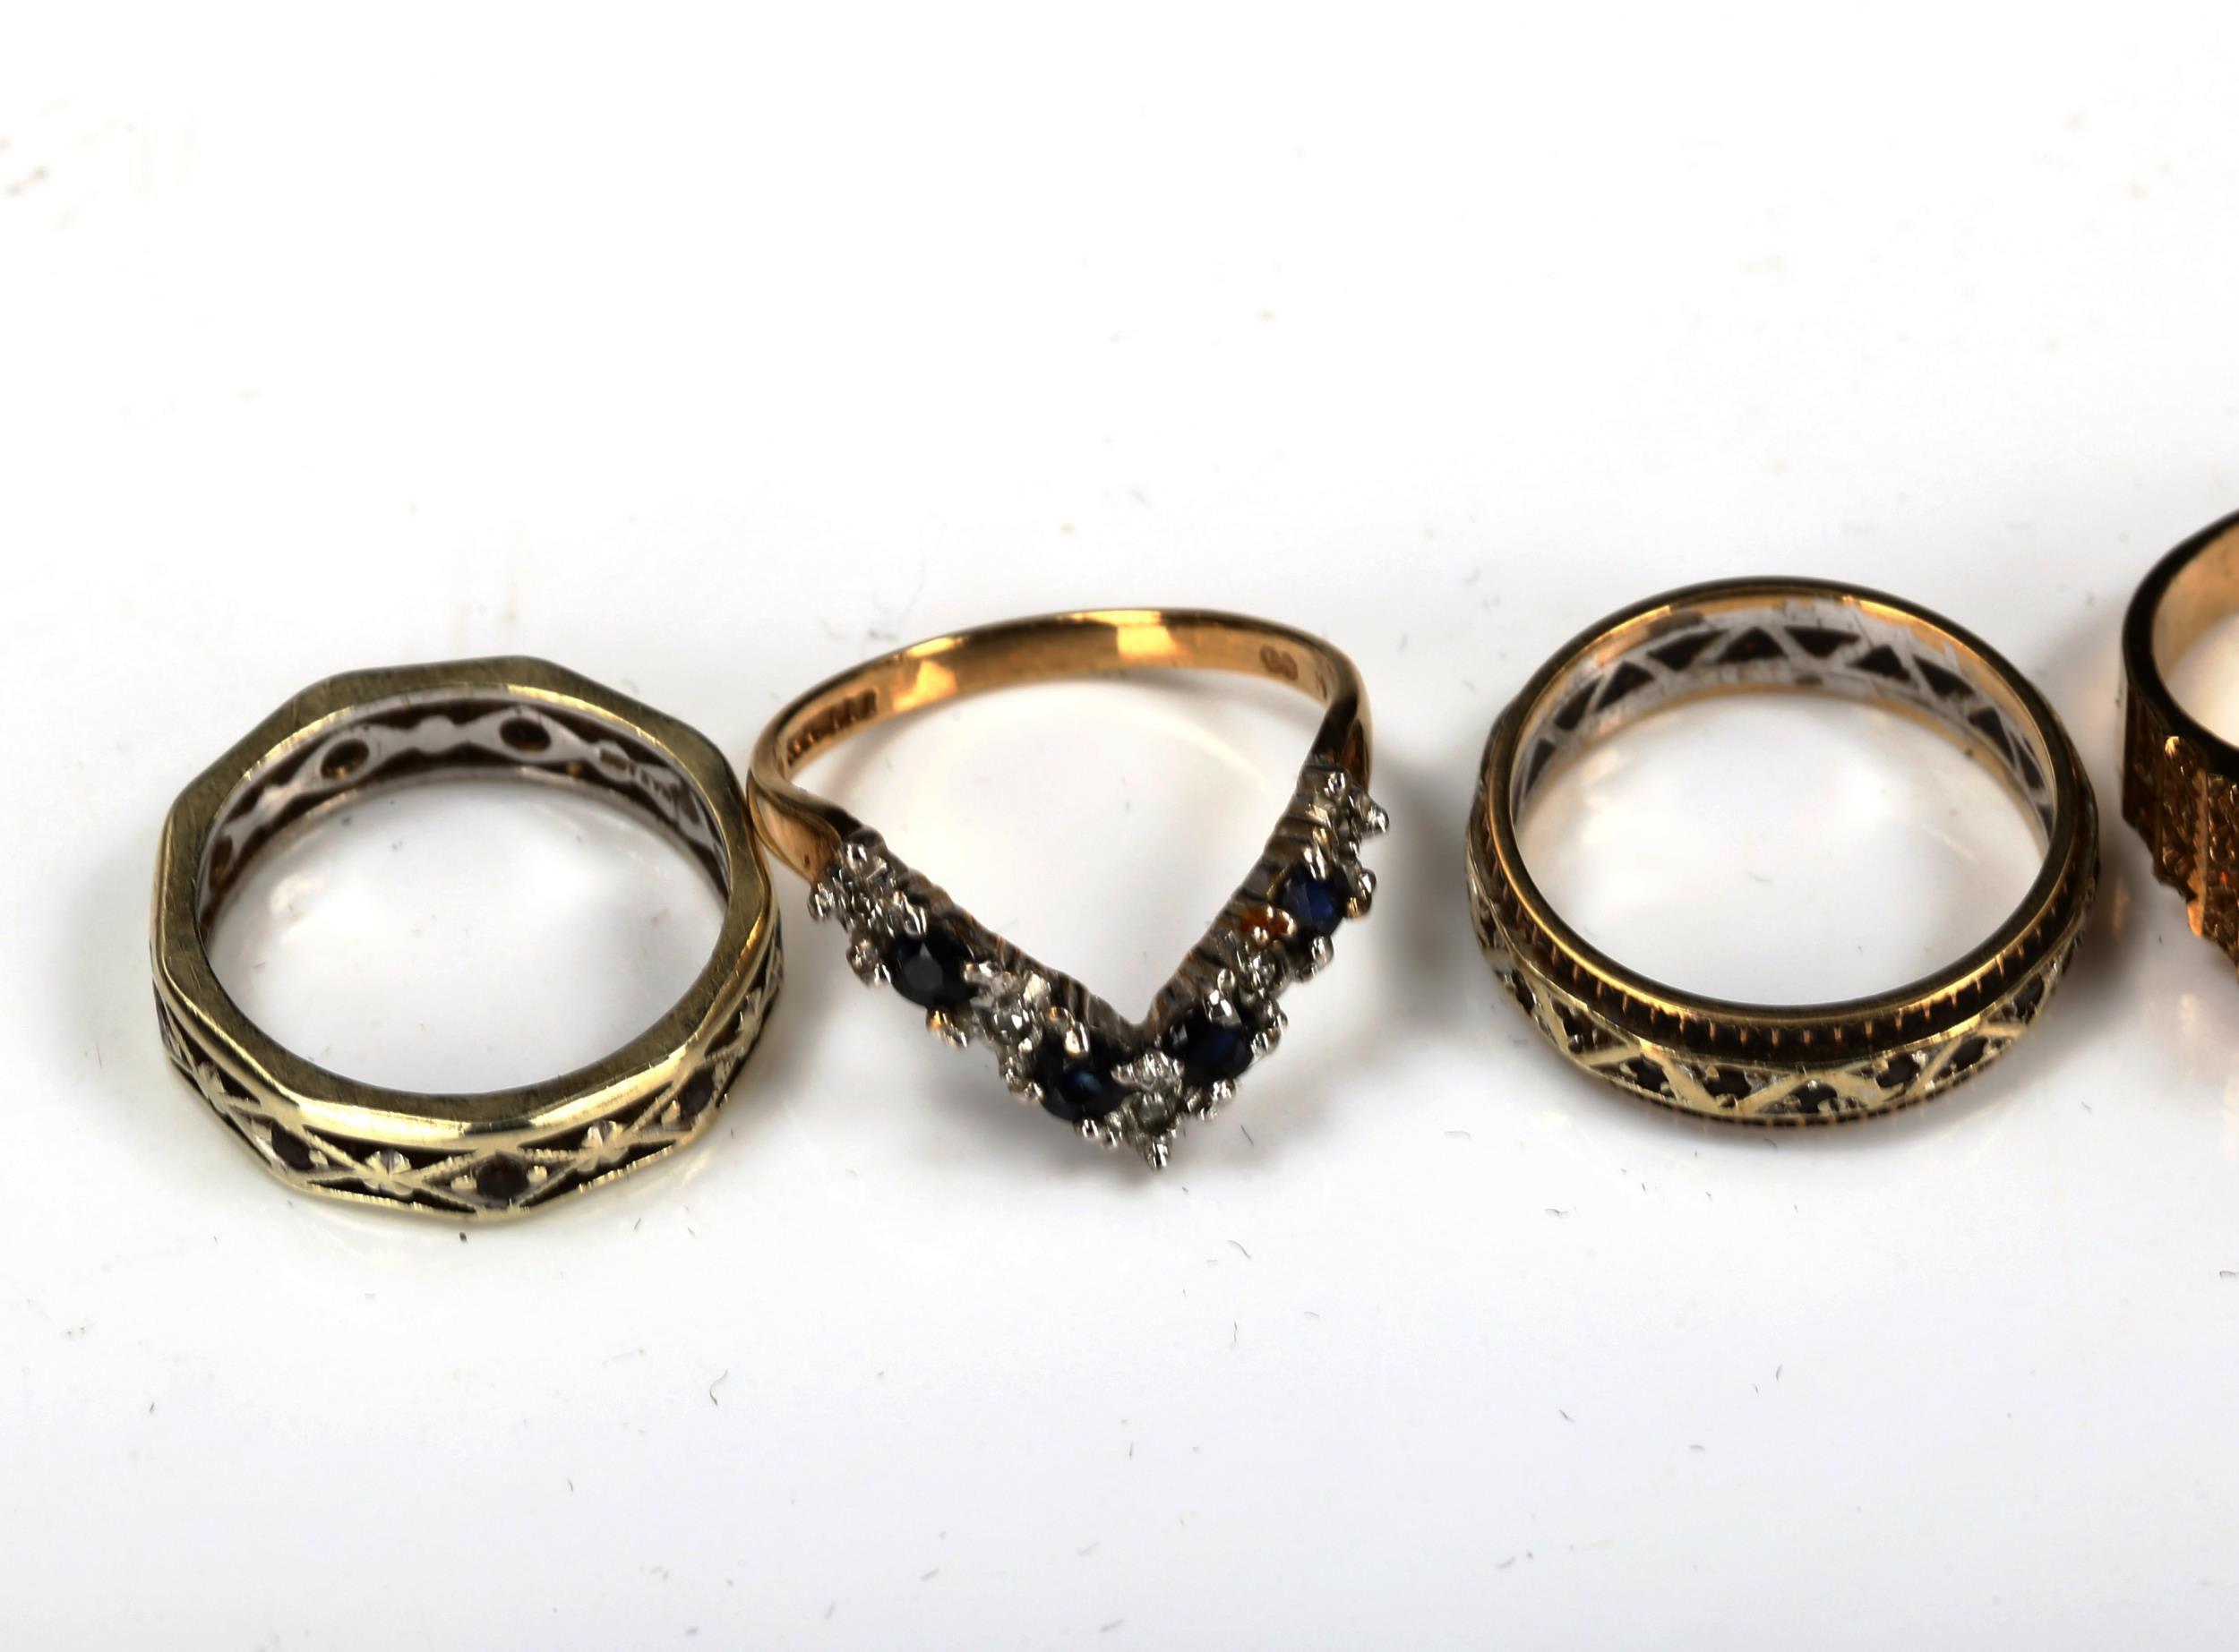 6 stone set rings, comprising 4 x 9ct (11g), 1 x 18ct (2.8g), and 1 x unmarked (3g) (6) No damage or - Image 3 of 4